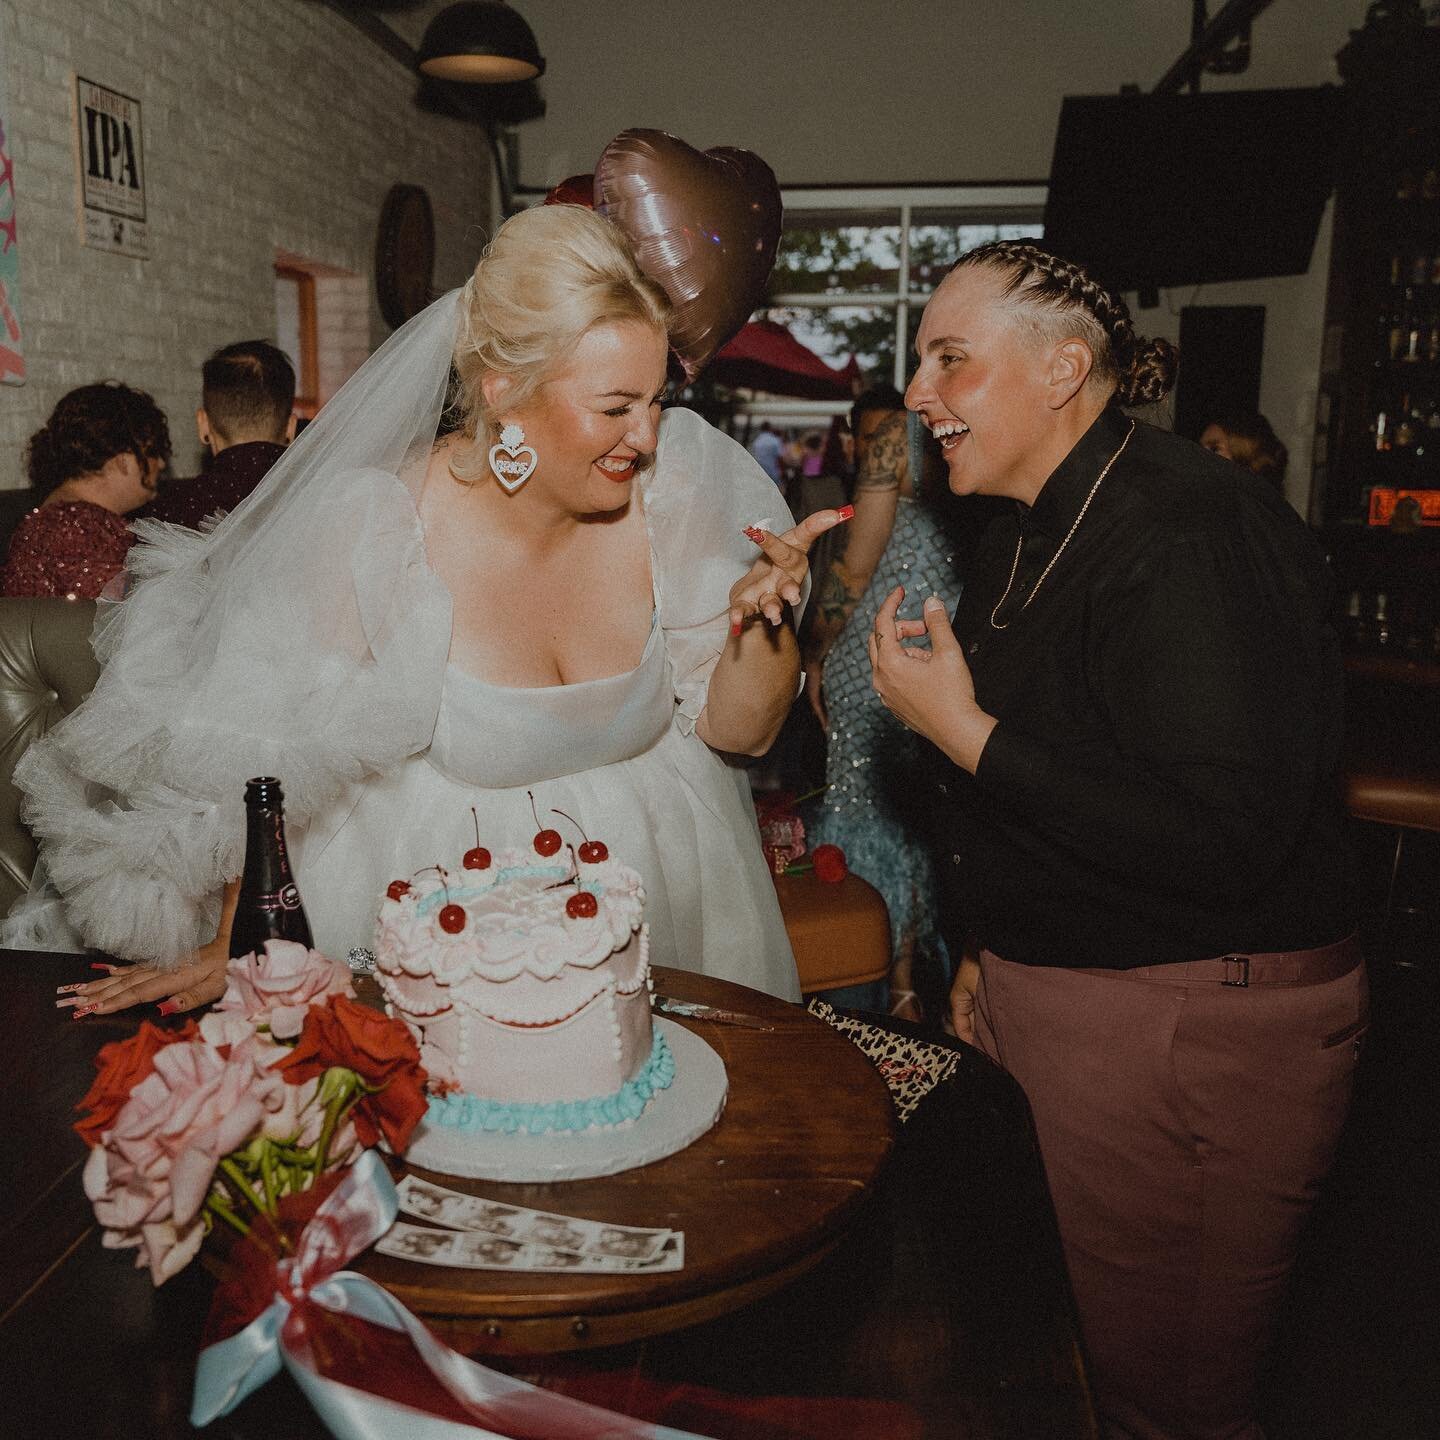 When the vibes are &lsquo;Anna Nicole Smith meets trashy vintage Vegas wedding&rsquo; 👌🏽😩💕✨

It was seriously so cool and super special getting to be a part of these two&rsquo;s wedding here in Vegas. Starting with an intimate ceremony @surething